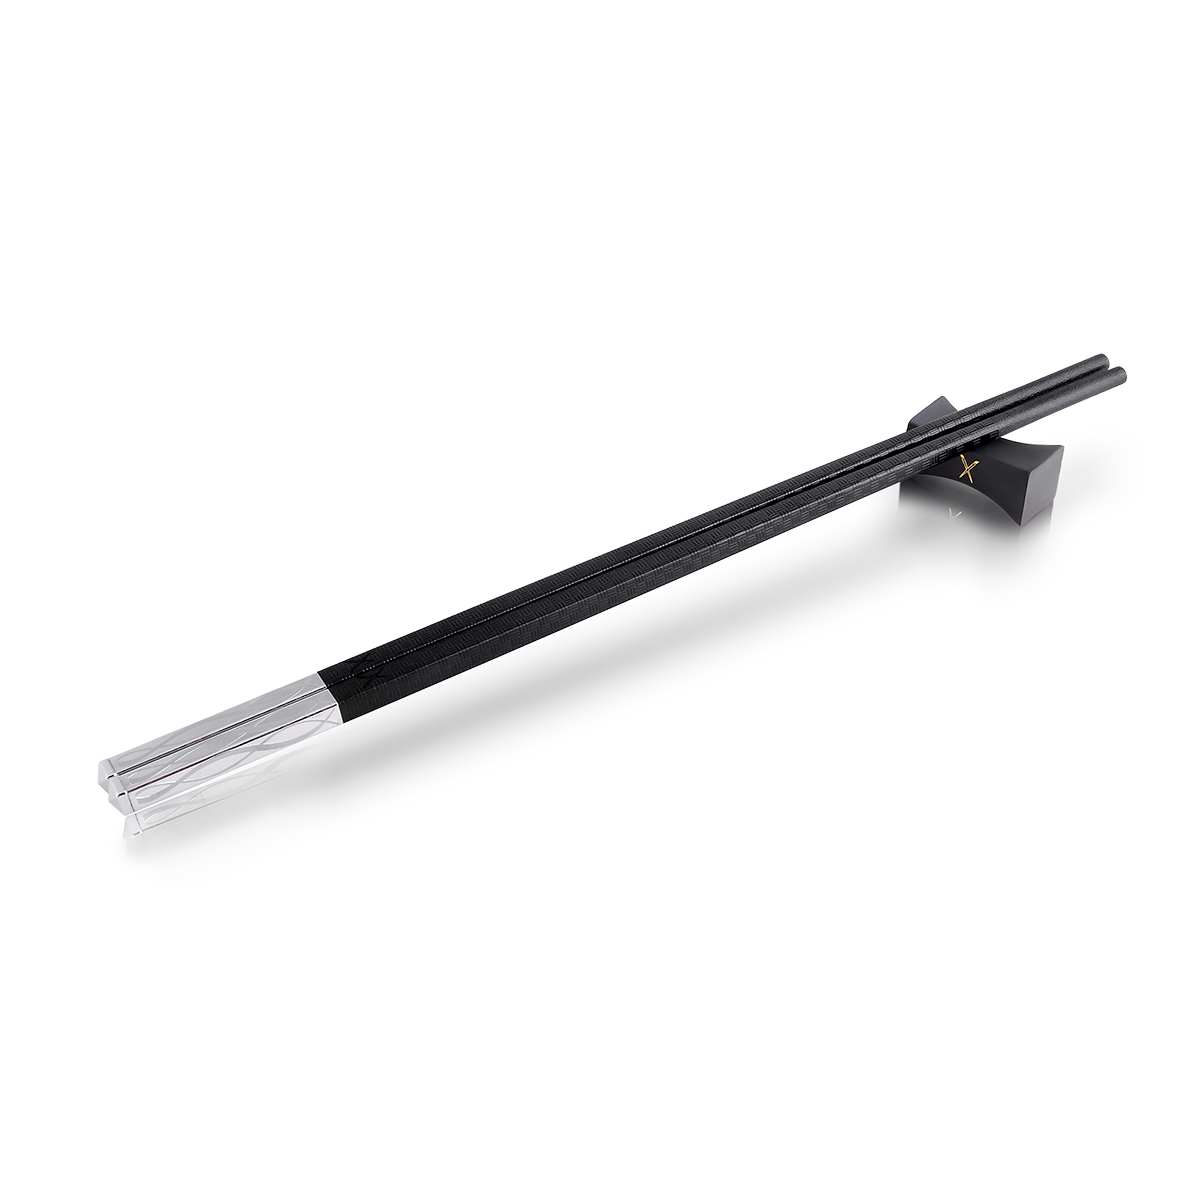 Luxury Chopsticks Set. Our chopsticks are luxurious, reusable and safe to use. Packed in a beautiful set, our designs are modern, traditional and elegant. Infinity - LuxSticks